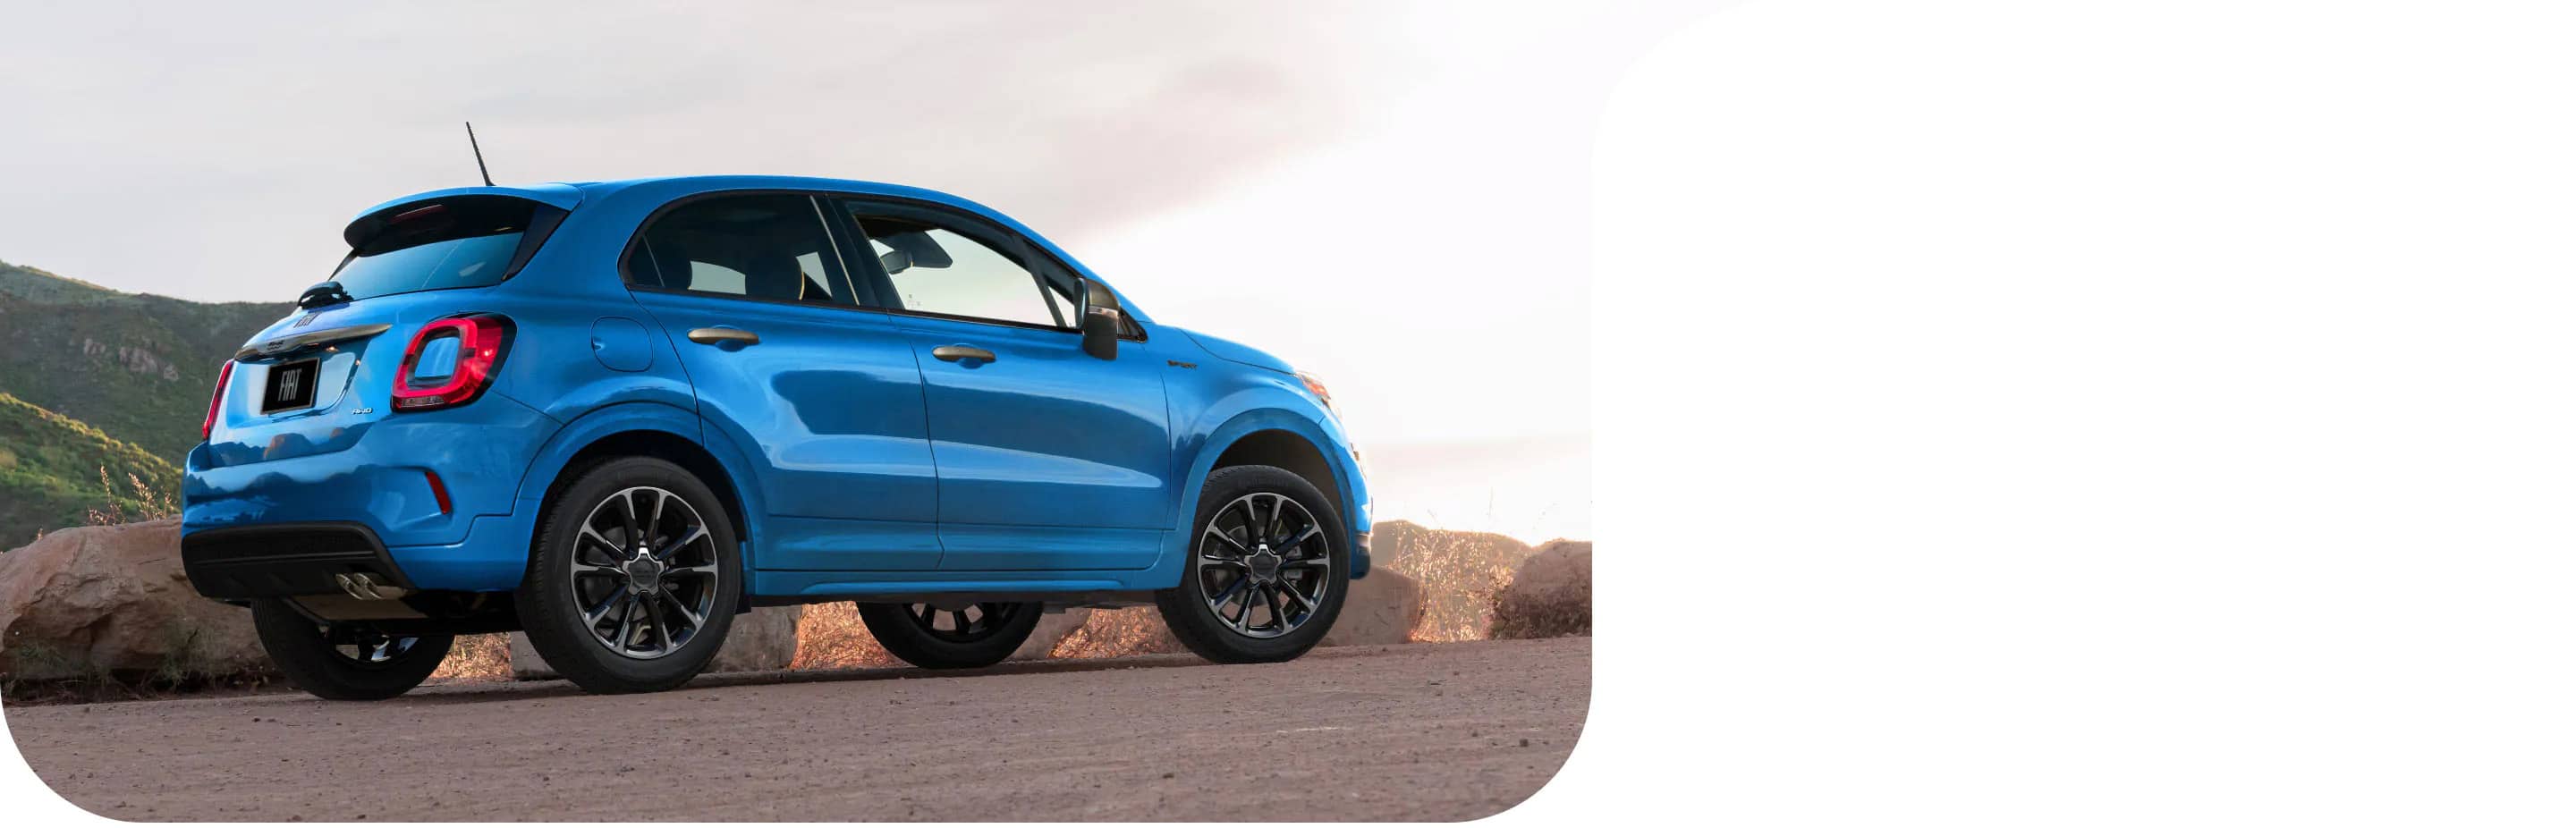 2022 FIAT® 500X Performance | Engine, MPG & More